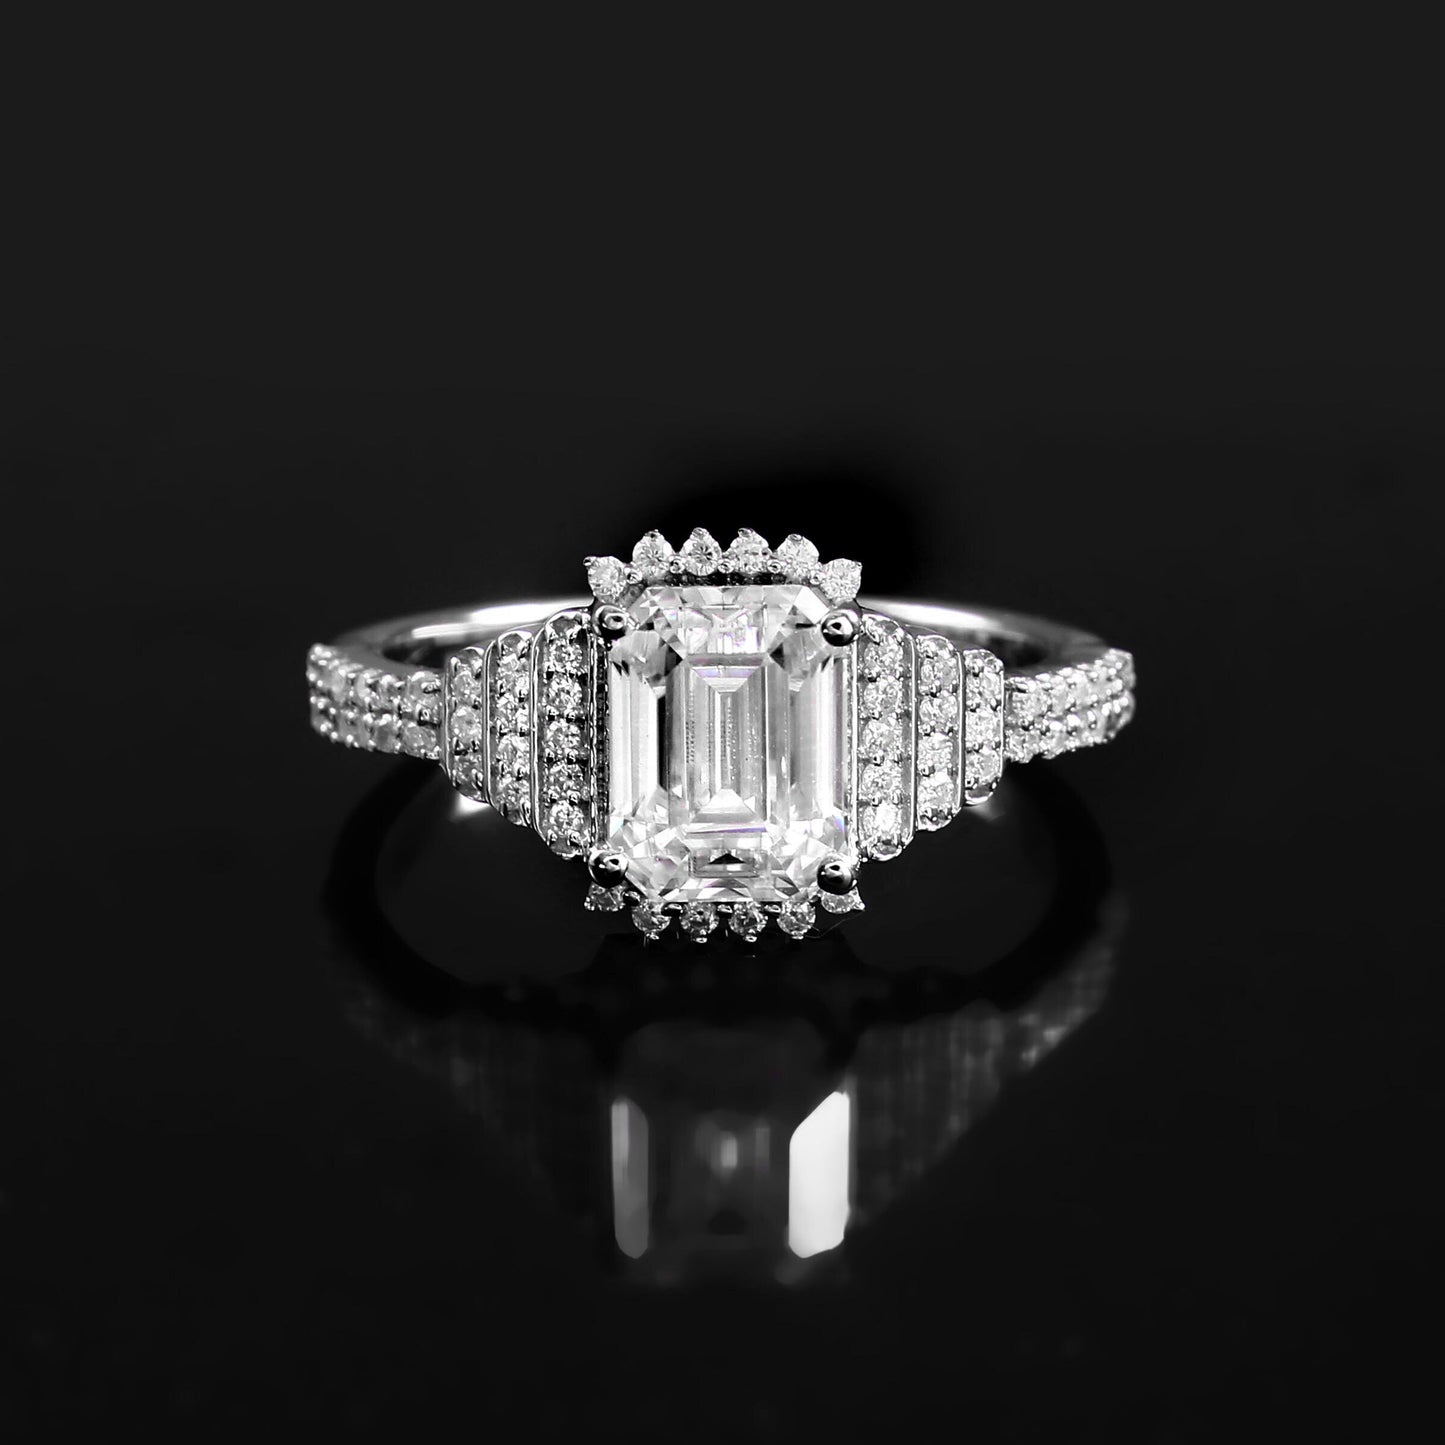 Emerald cut Solitaire Diamond Ring with layered shank